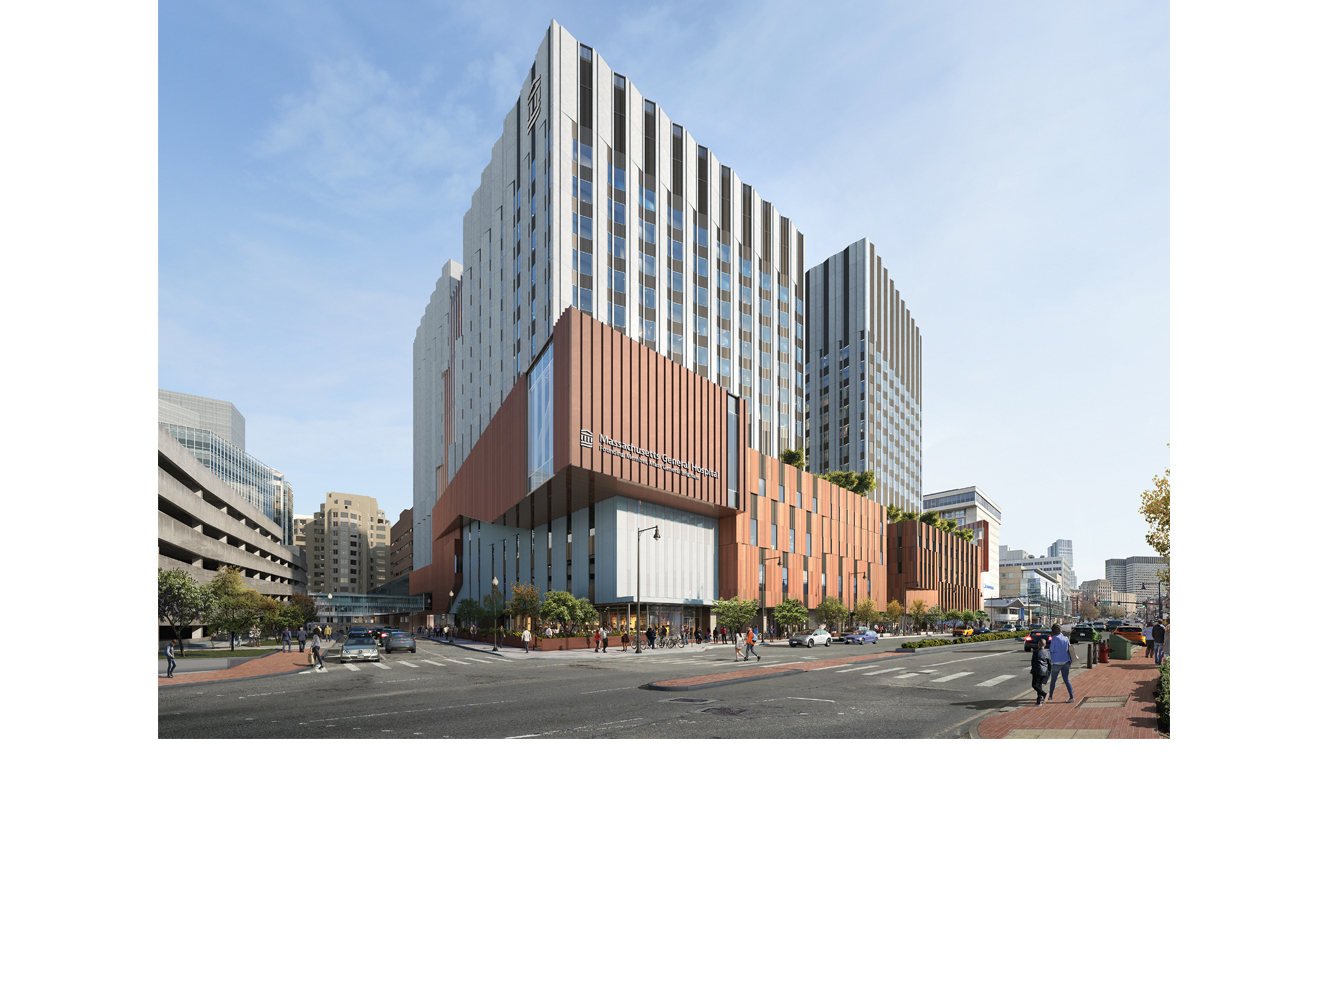 Architectural rendering of Mass General's new building on Cambridge St.